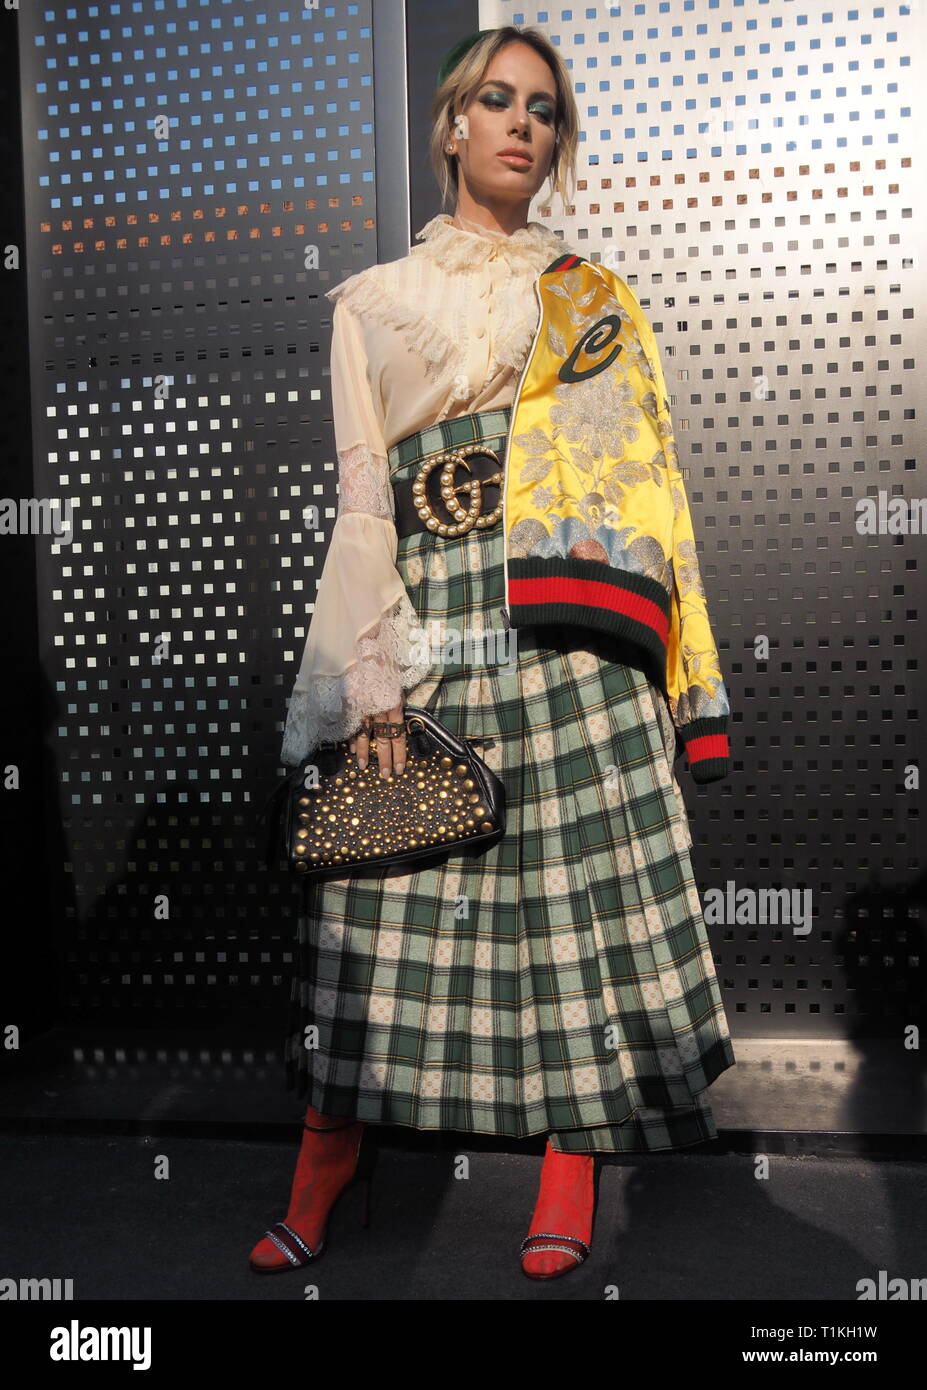 Gucci Fashion Show High Resolution Stock Photography and Images - Alamy